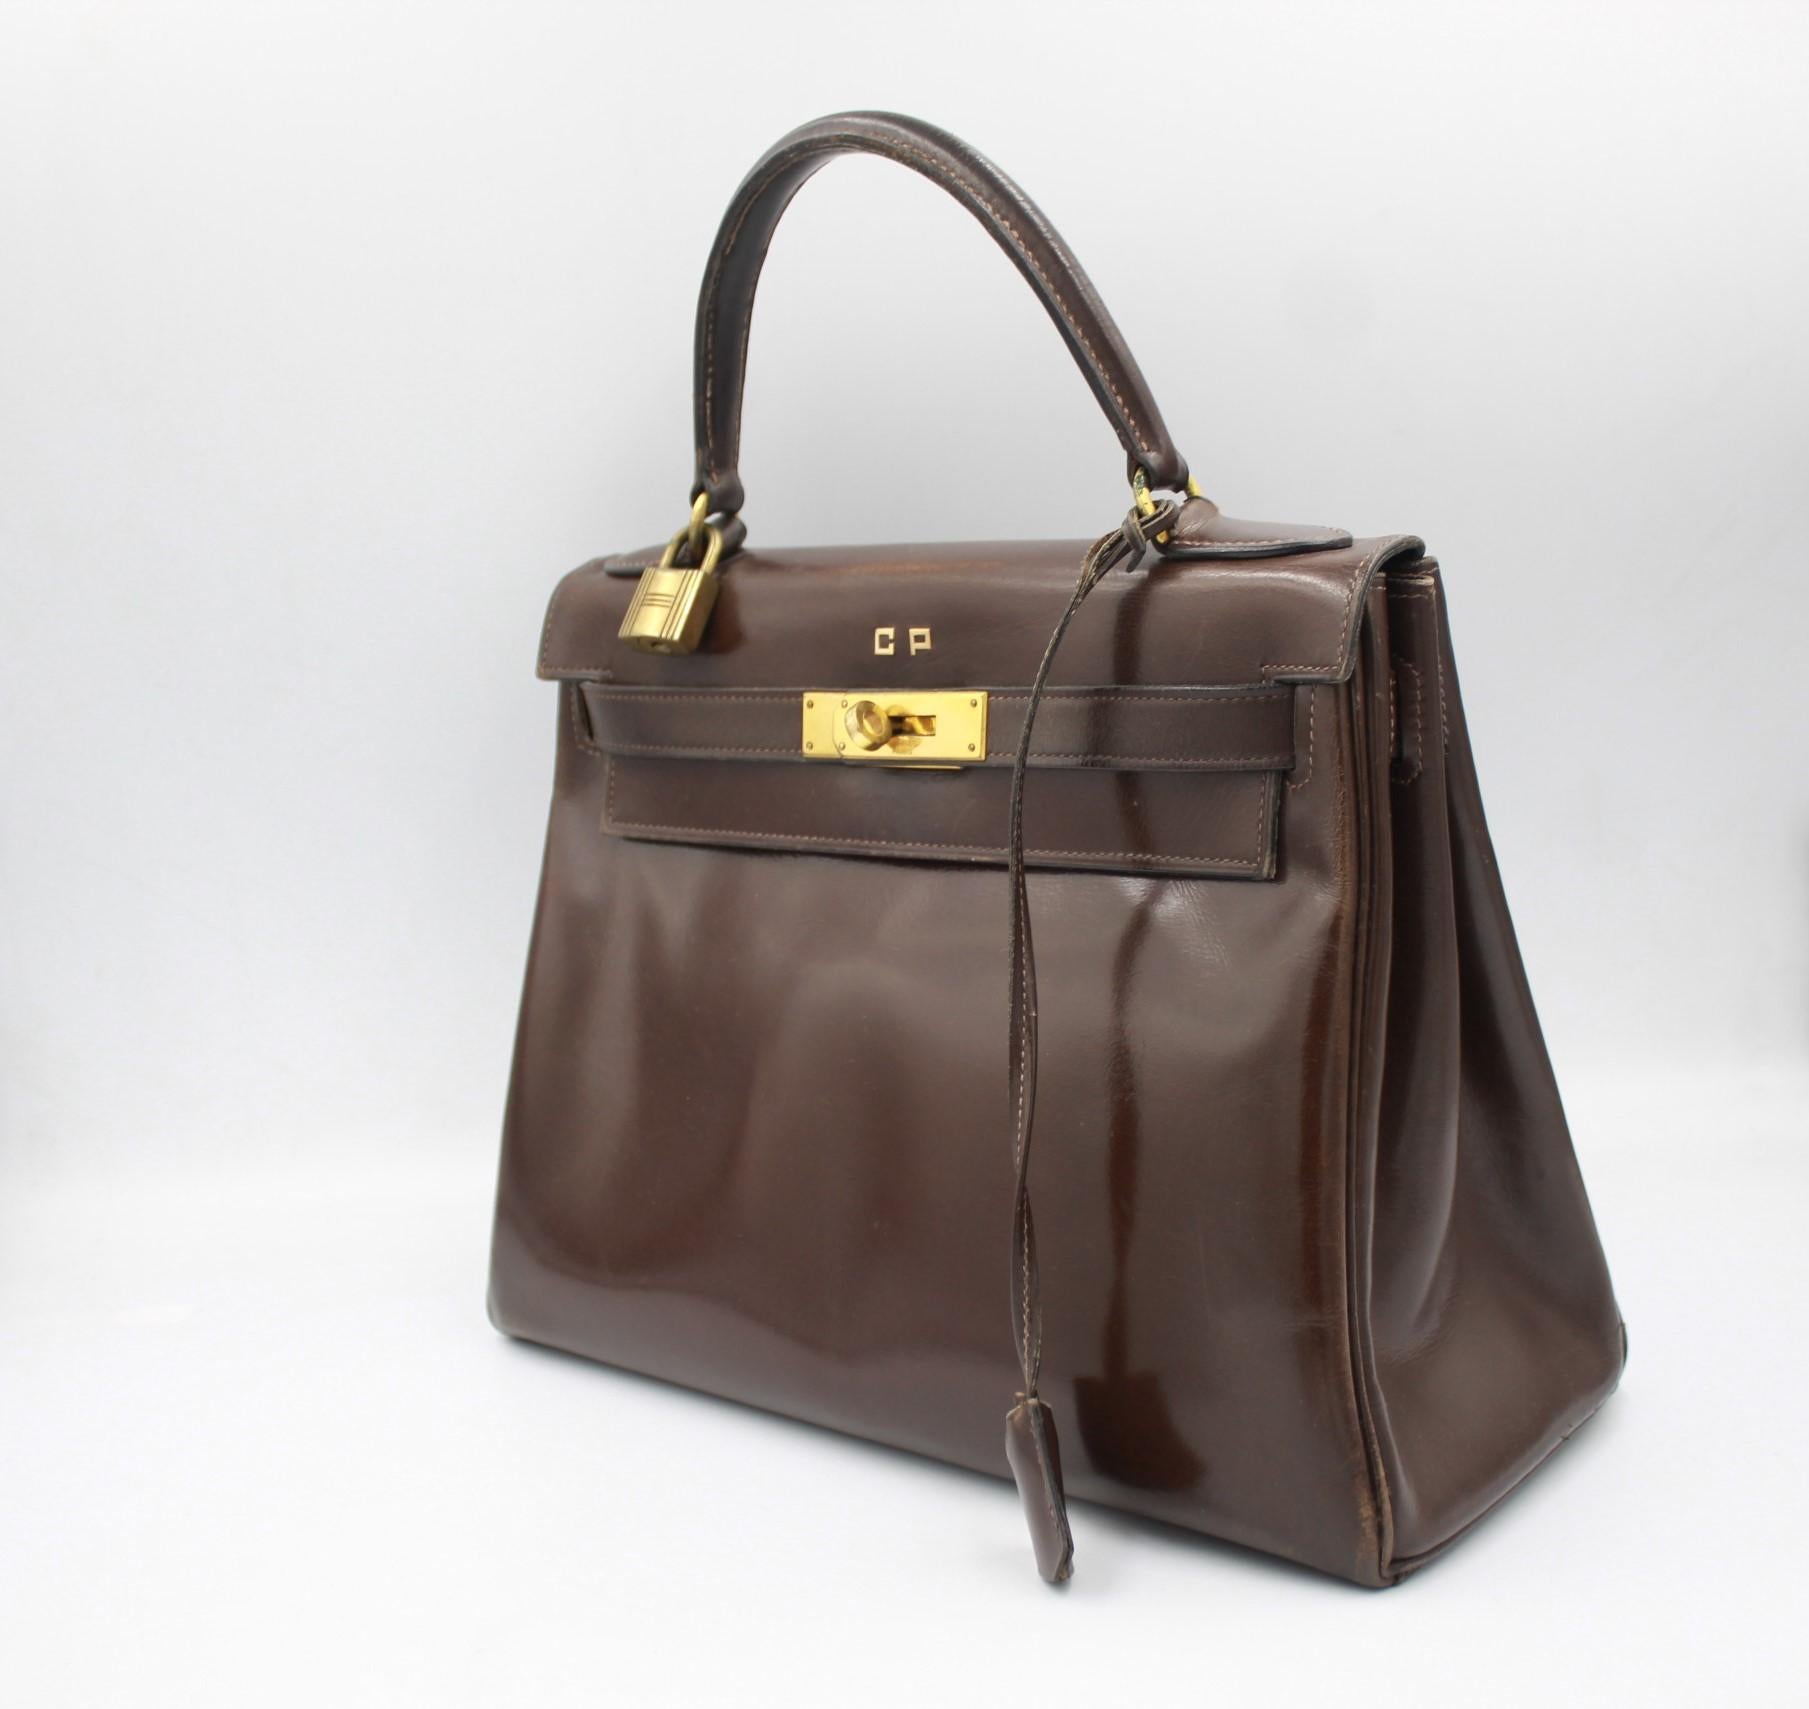 Hermes Kelly vintage handBag 28 in brown leather
Bag in good vintage condition, no major sign of use except from light scratches and light signs of use in the leather
With the initial « CP » in gold
sold with its lock and key

28cm x 21cm x 12cm